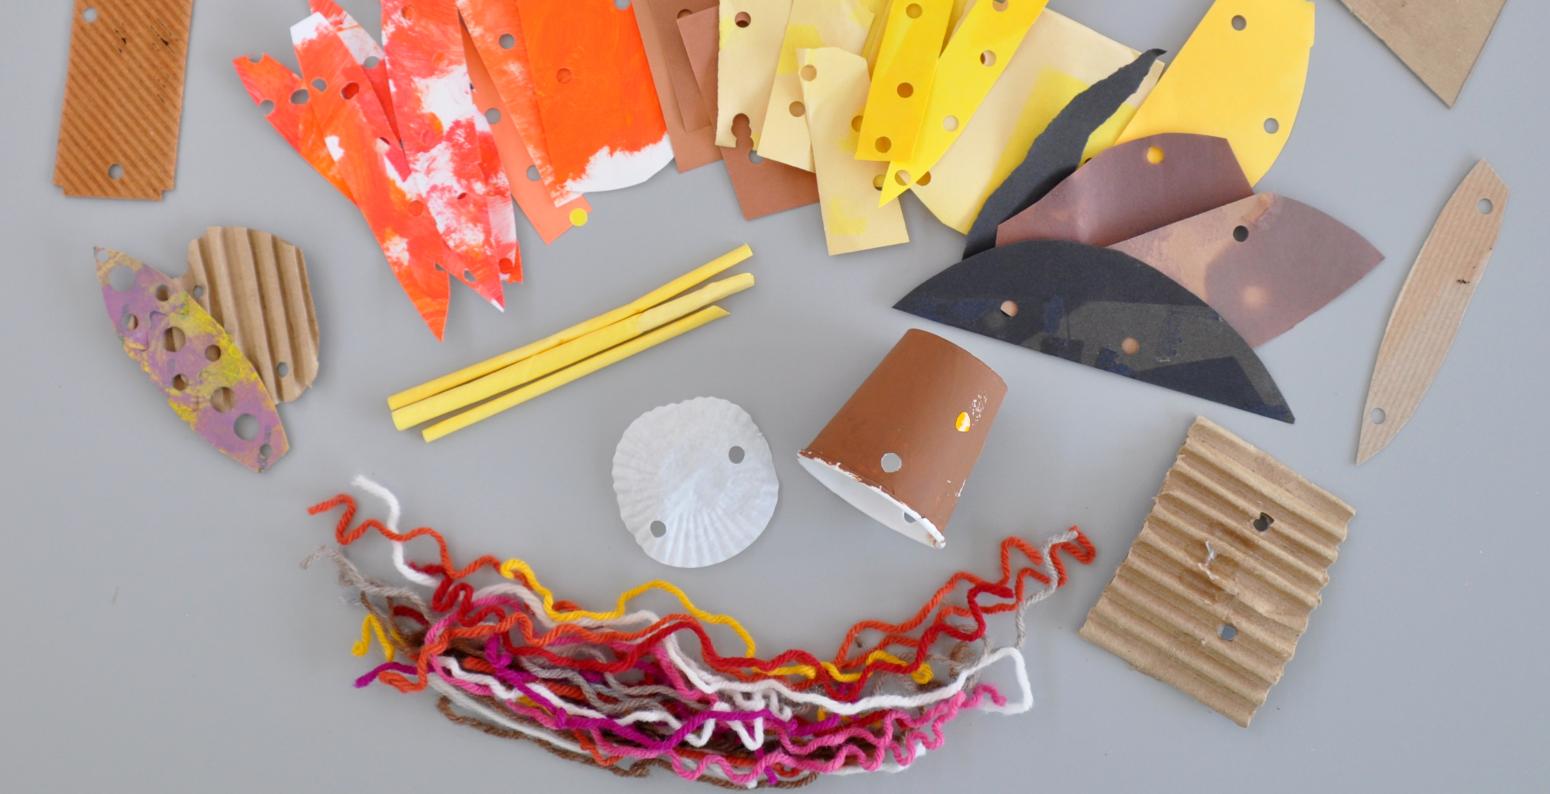 An array of cardboard, paper materials, and yarns.